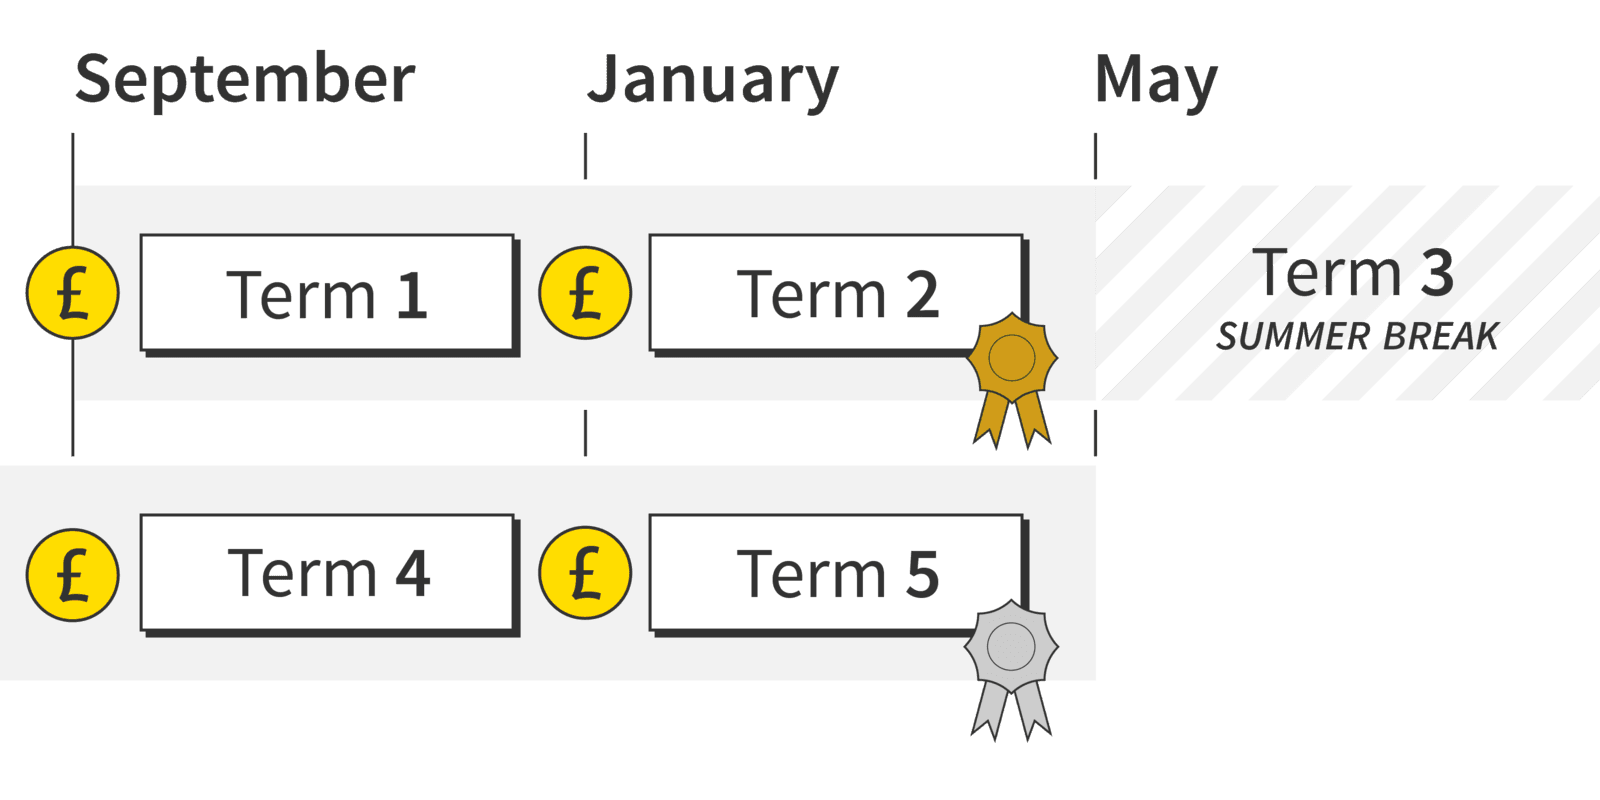 Infographic summarising the example payment schedule described above.